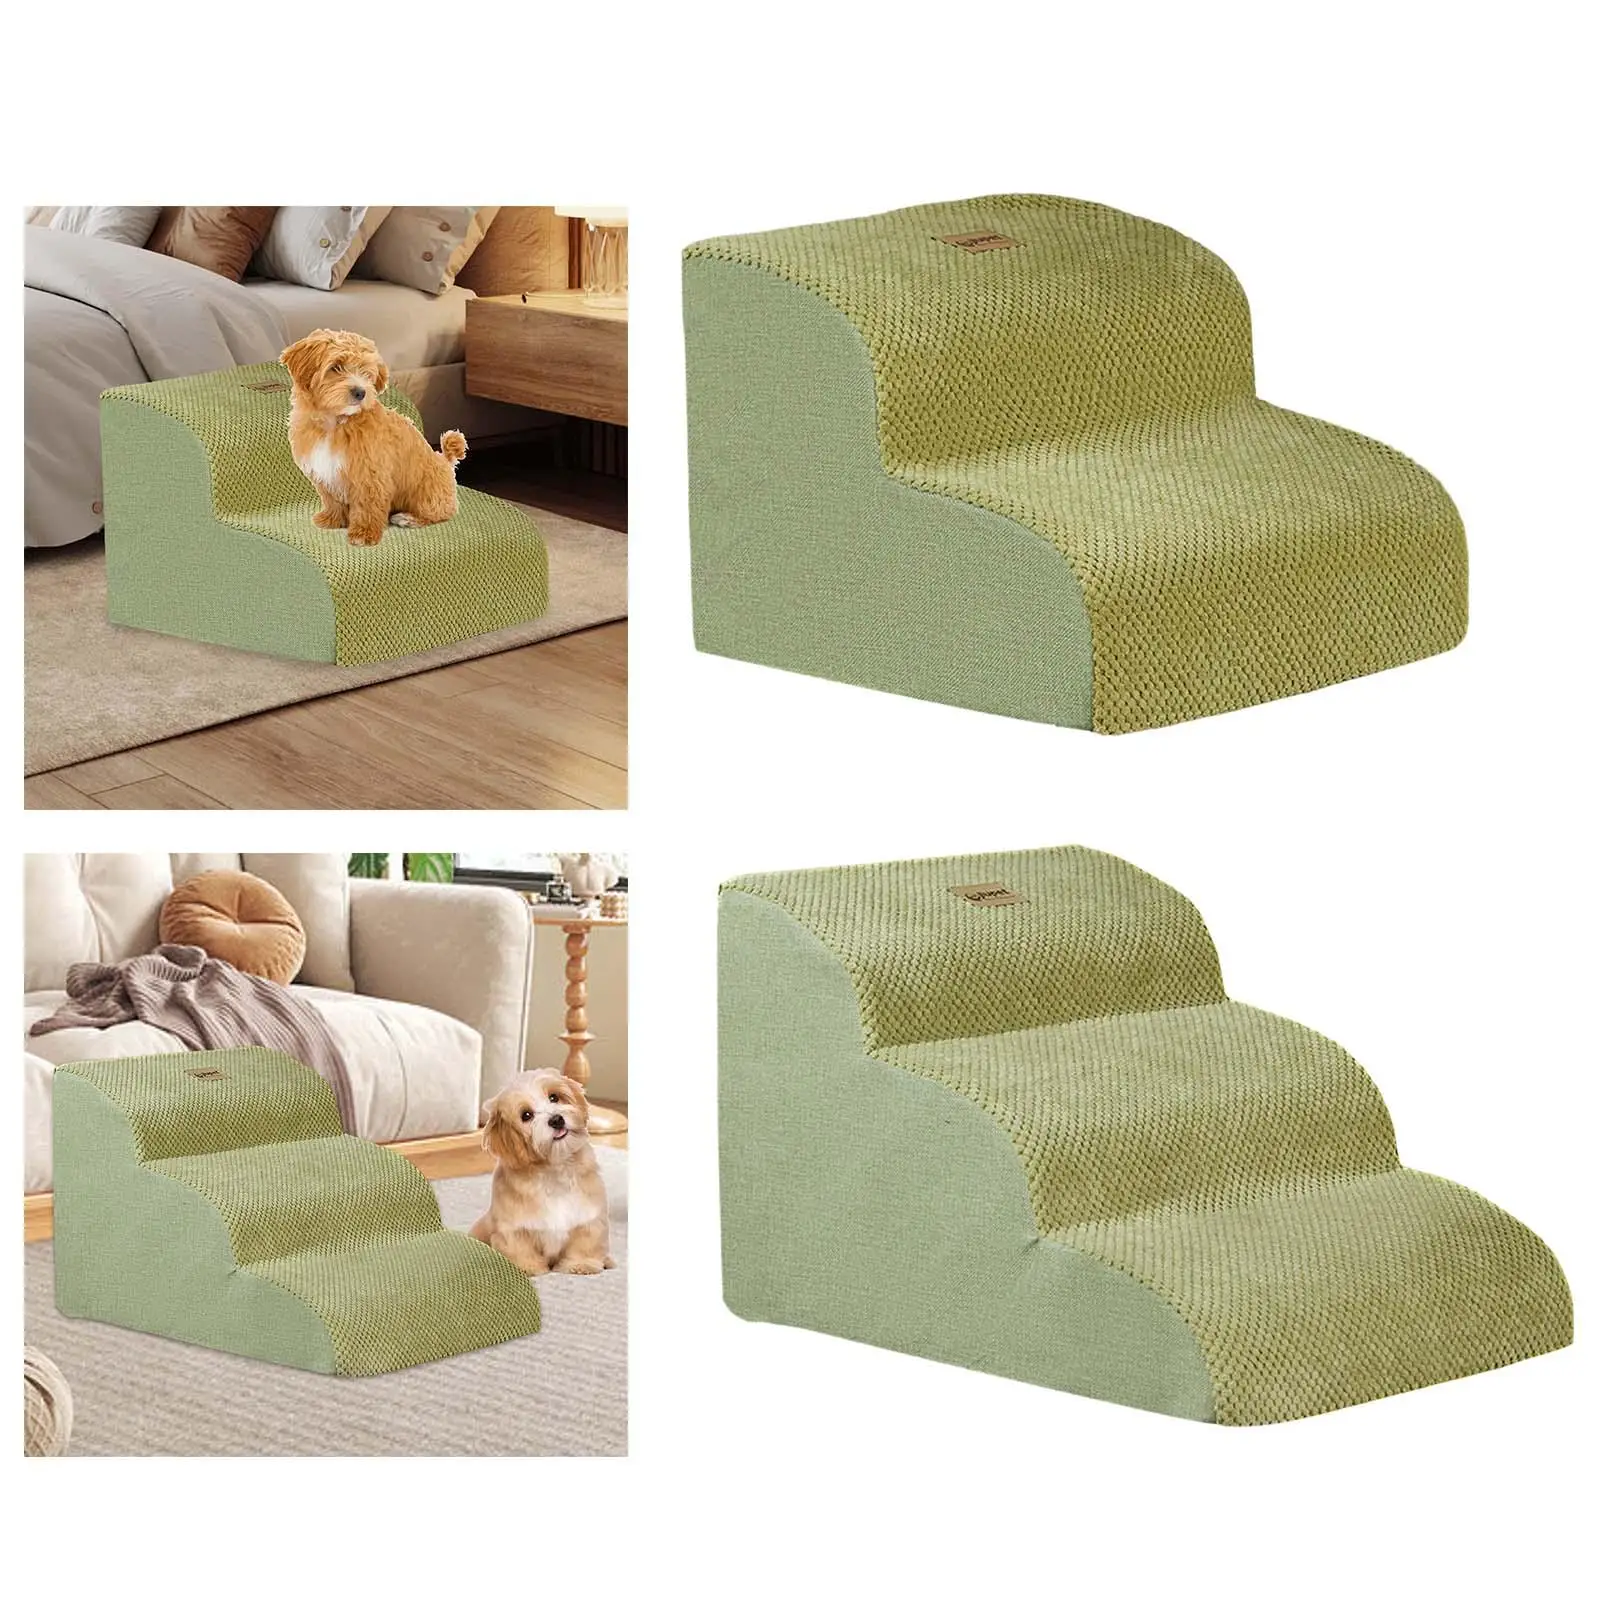 Dog Stairs Nonslip with Removable Washable Cover Pet Stairs for Small Dogs Pet Foam Ladder for Tall Bed Couch Home Play SUV